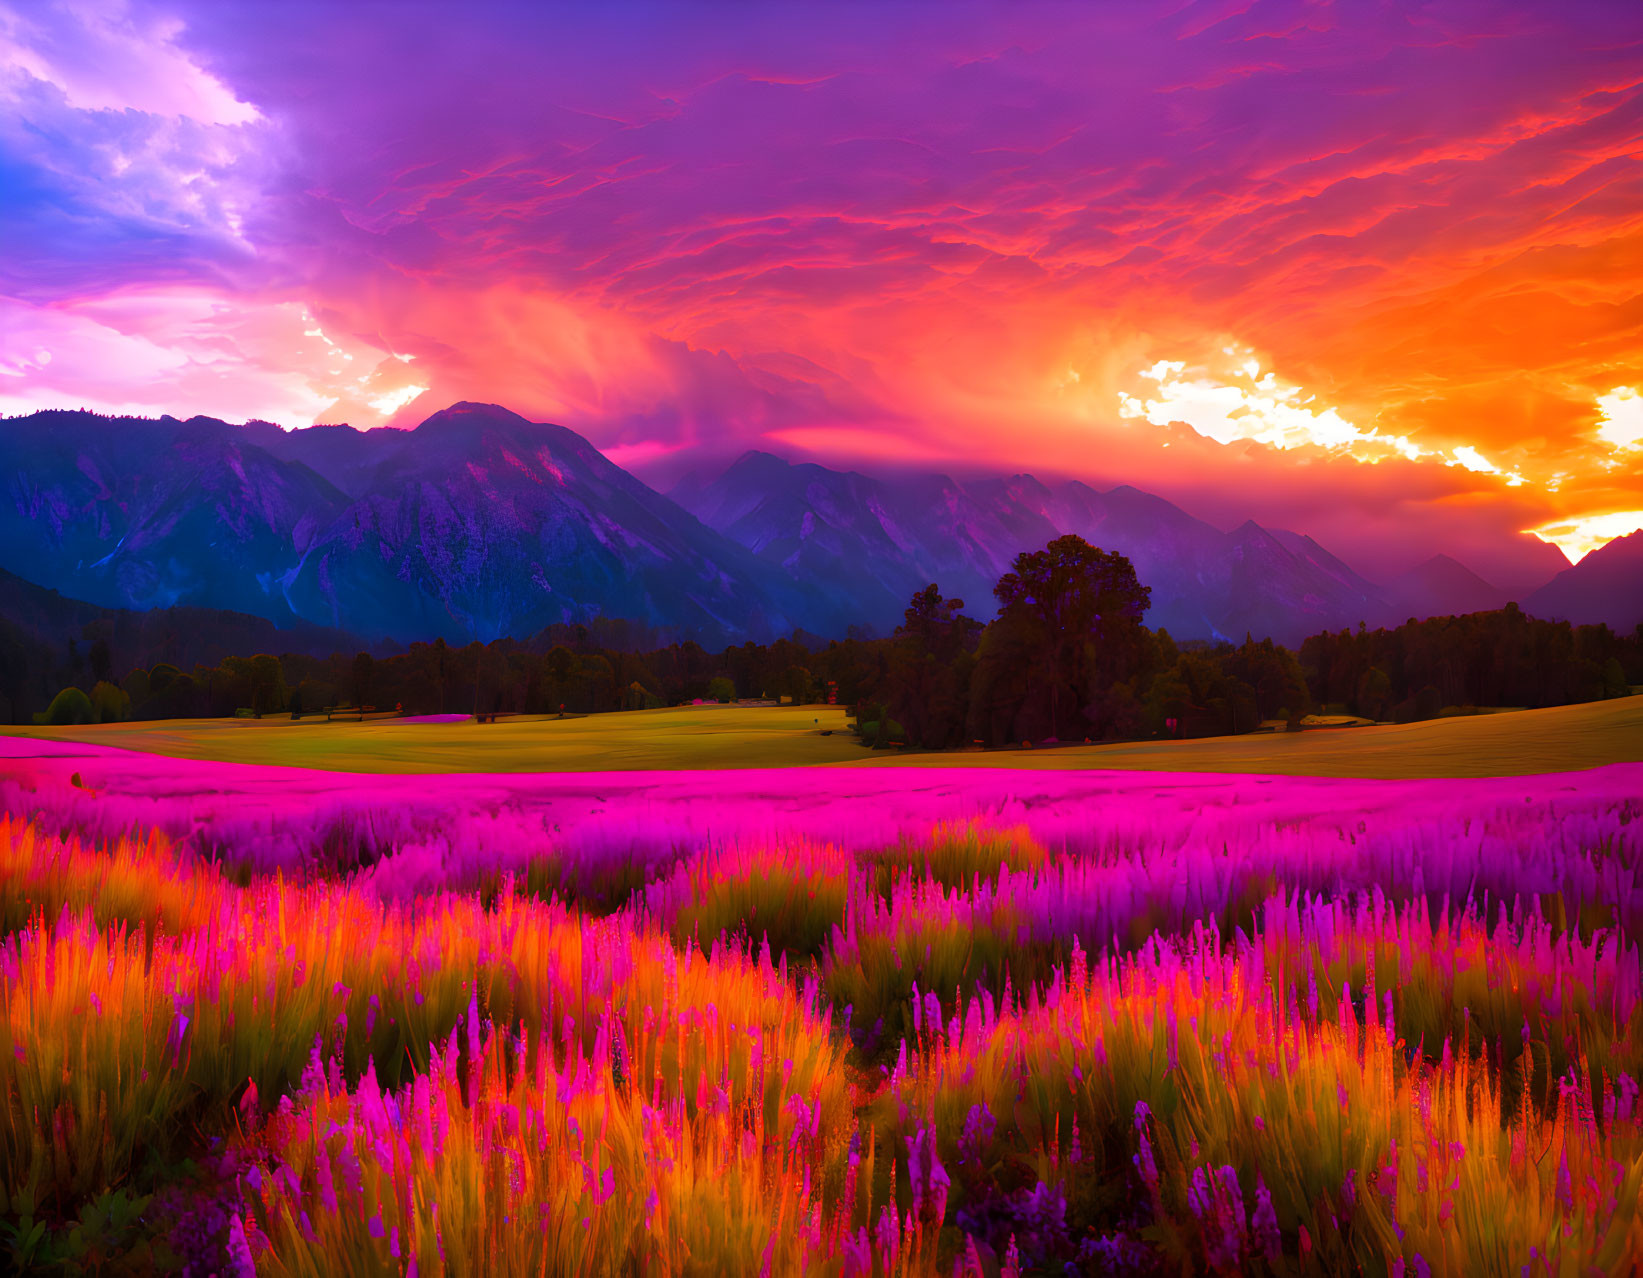 Scenic sunset over mountain range with purple flowers